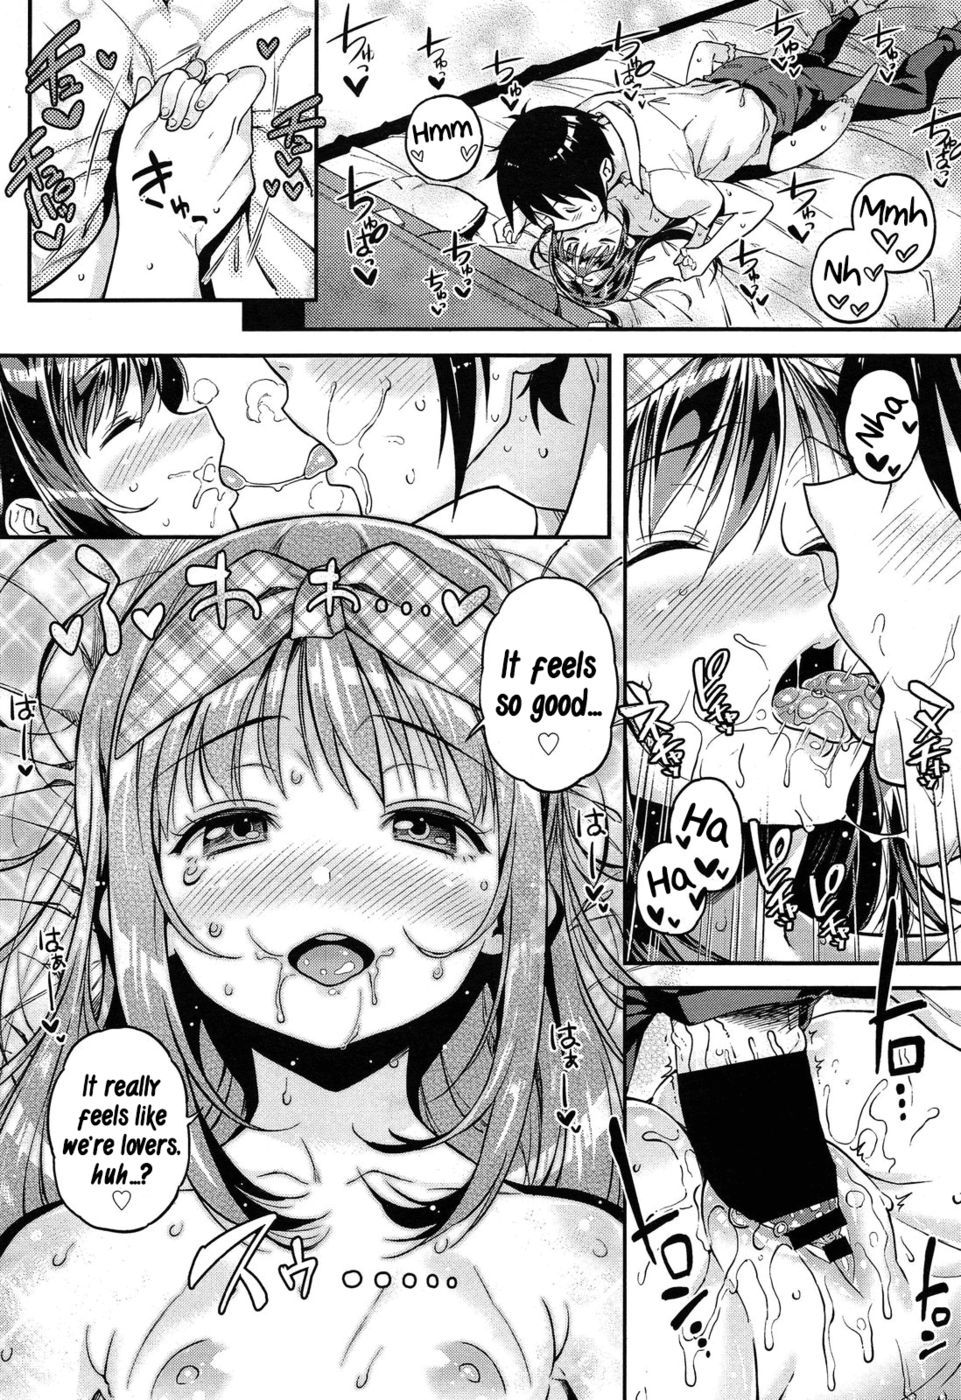 Hentai Manga Comic-Let's watch it together!-Read-17